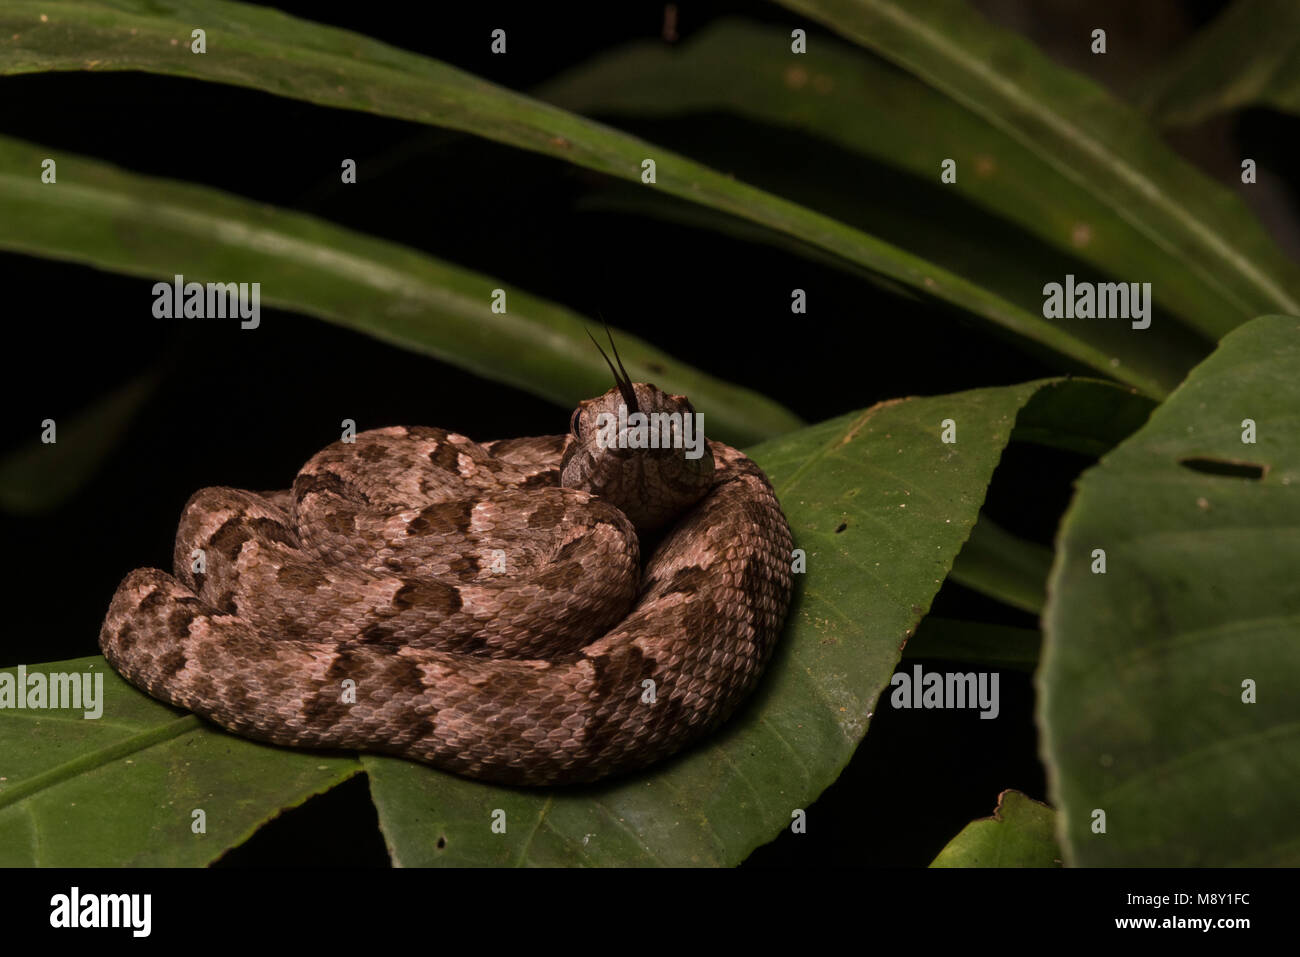 A small fer de lance (Bothrops atrox) curled up on a leaf at night, this species is the most dangerous snake in its range. Stock Photo